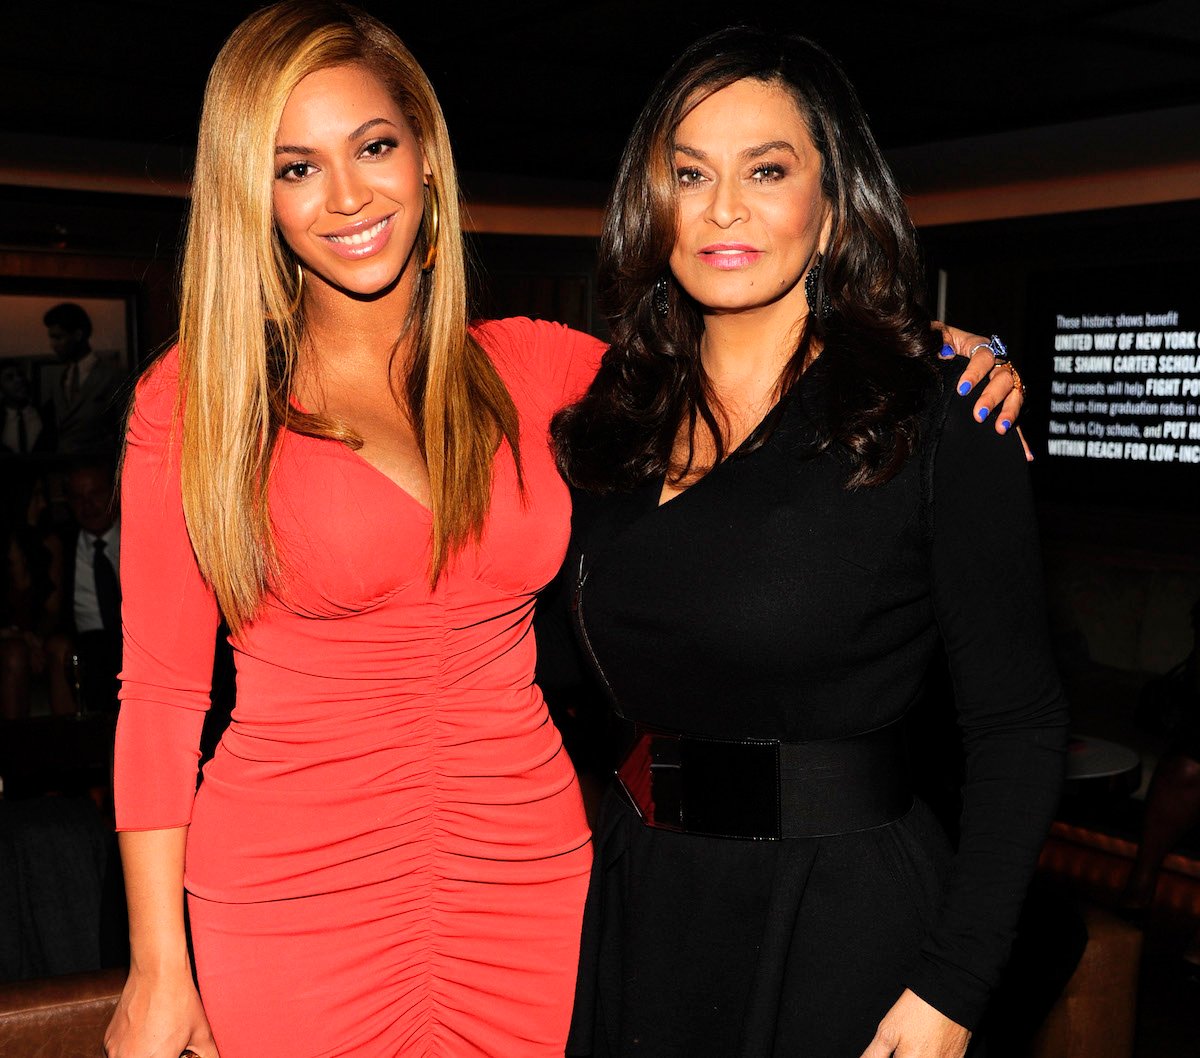 Beyonce and Tina Knowles-Lawson smile and pose together